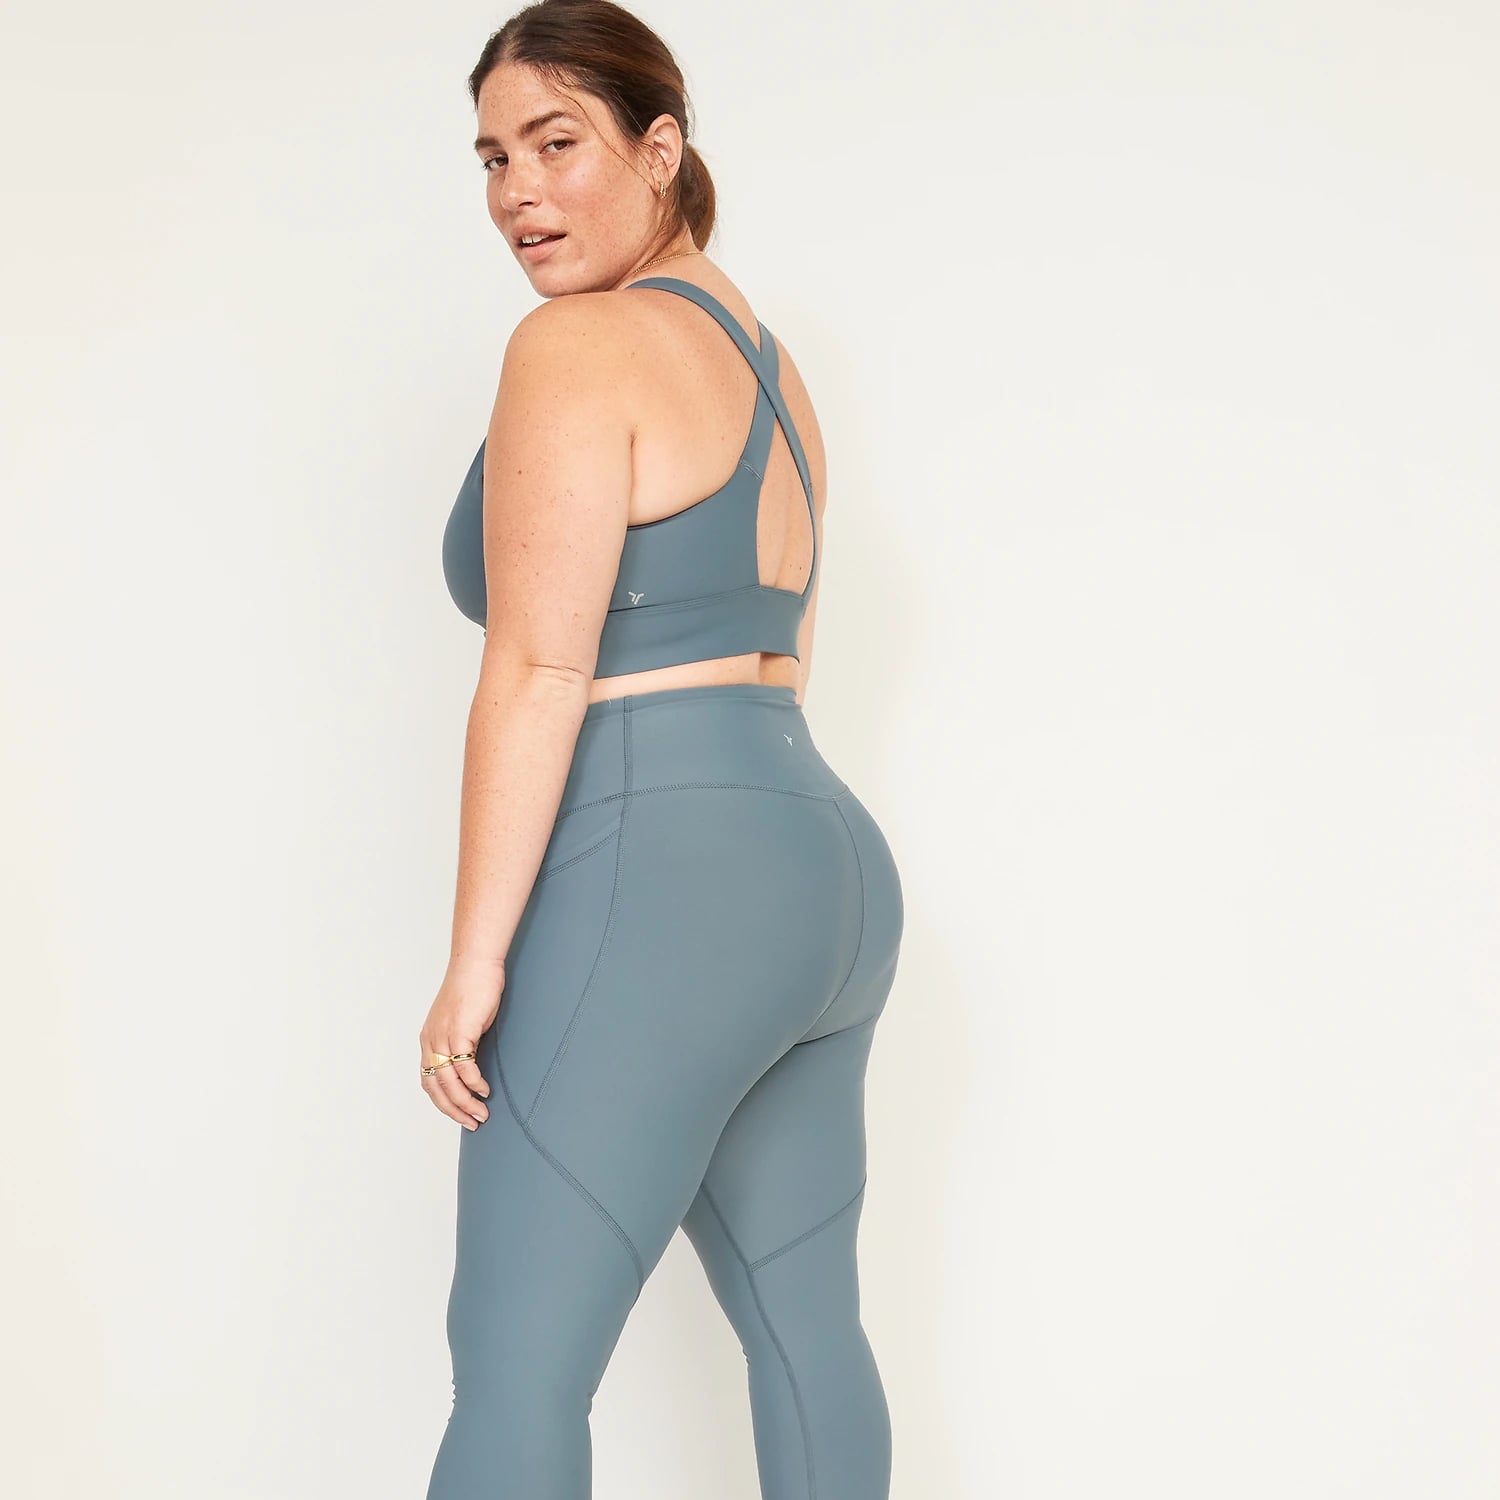 10 Pairs Of Inclusively Sized Workout Leggings That Reviewers Can't Stop  Raving About | Rank & Style